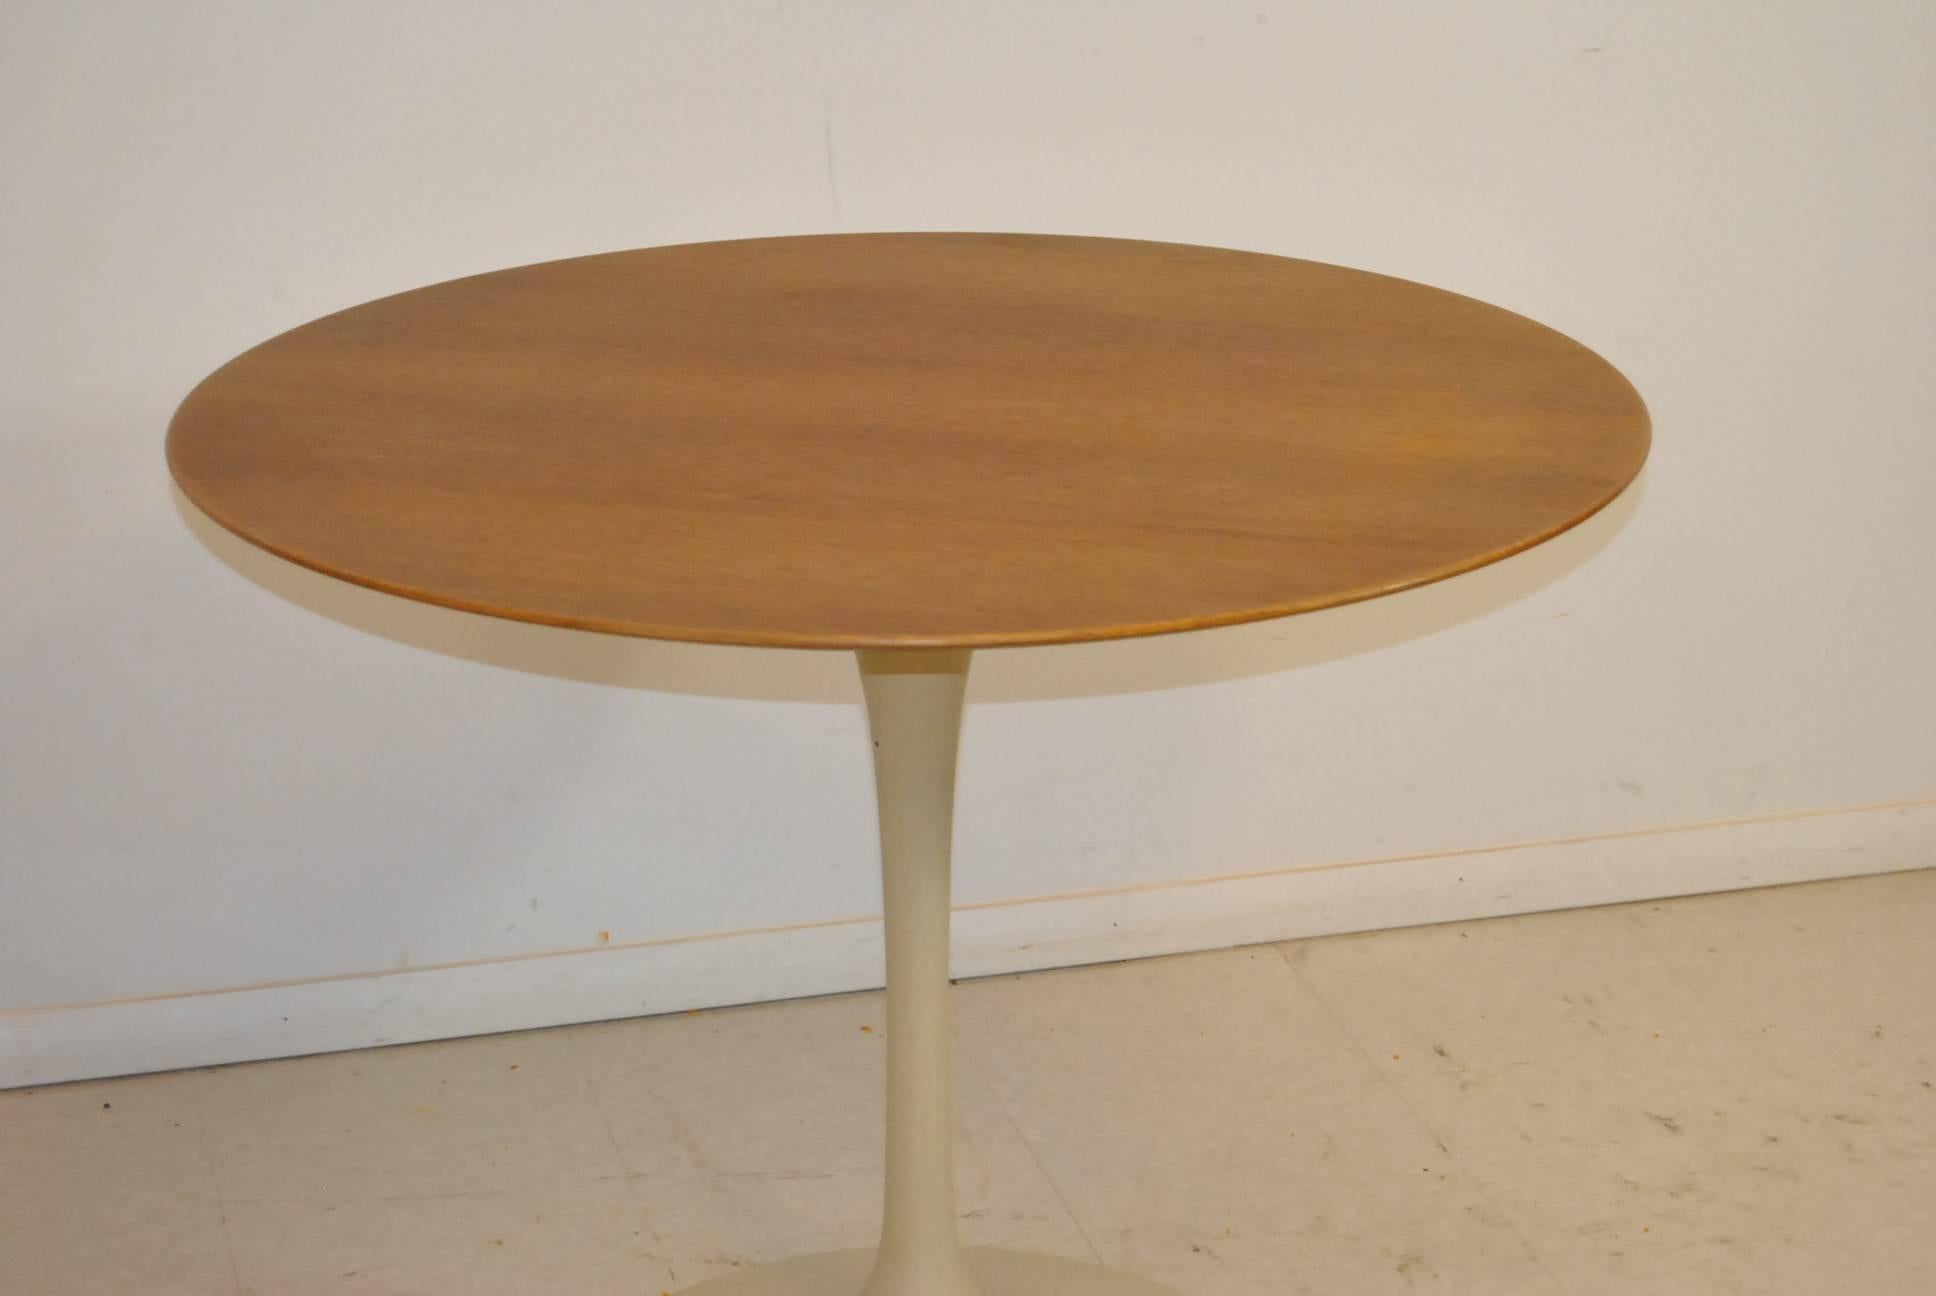 The Saarinen round table by Knoll was a revolutionary modern dining table because it stood in such stark contrast to the pedestal tables that came before Eero Saarinen’s elegant design. Determined to “clear up the slum of legs,” that defined most